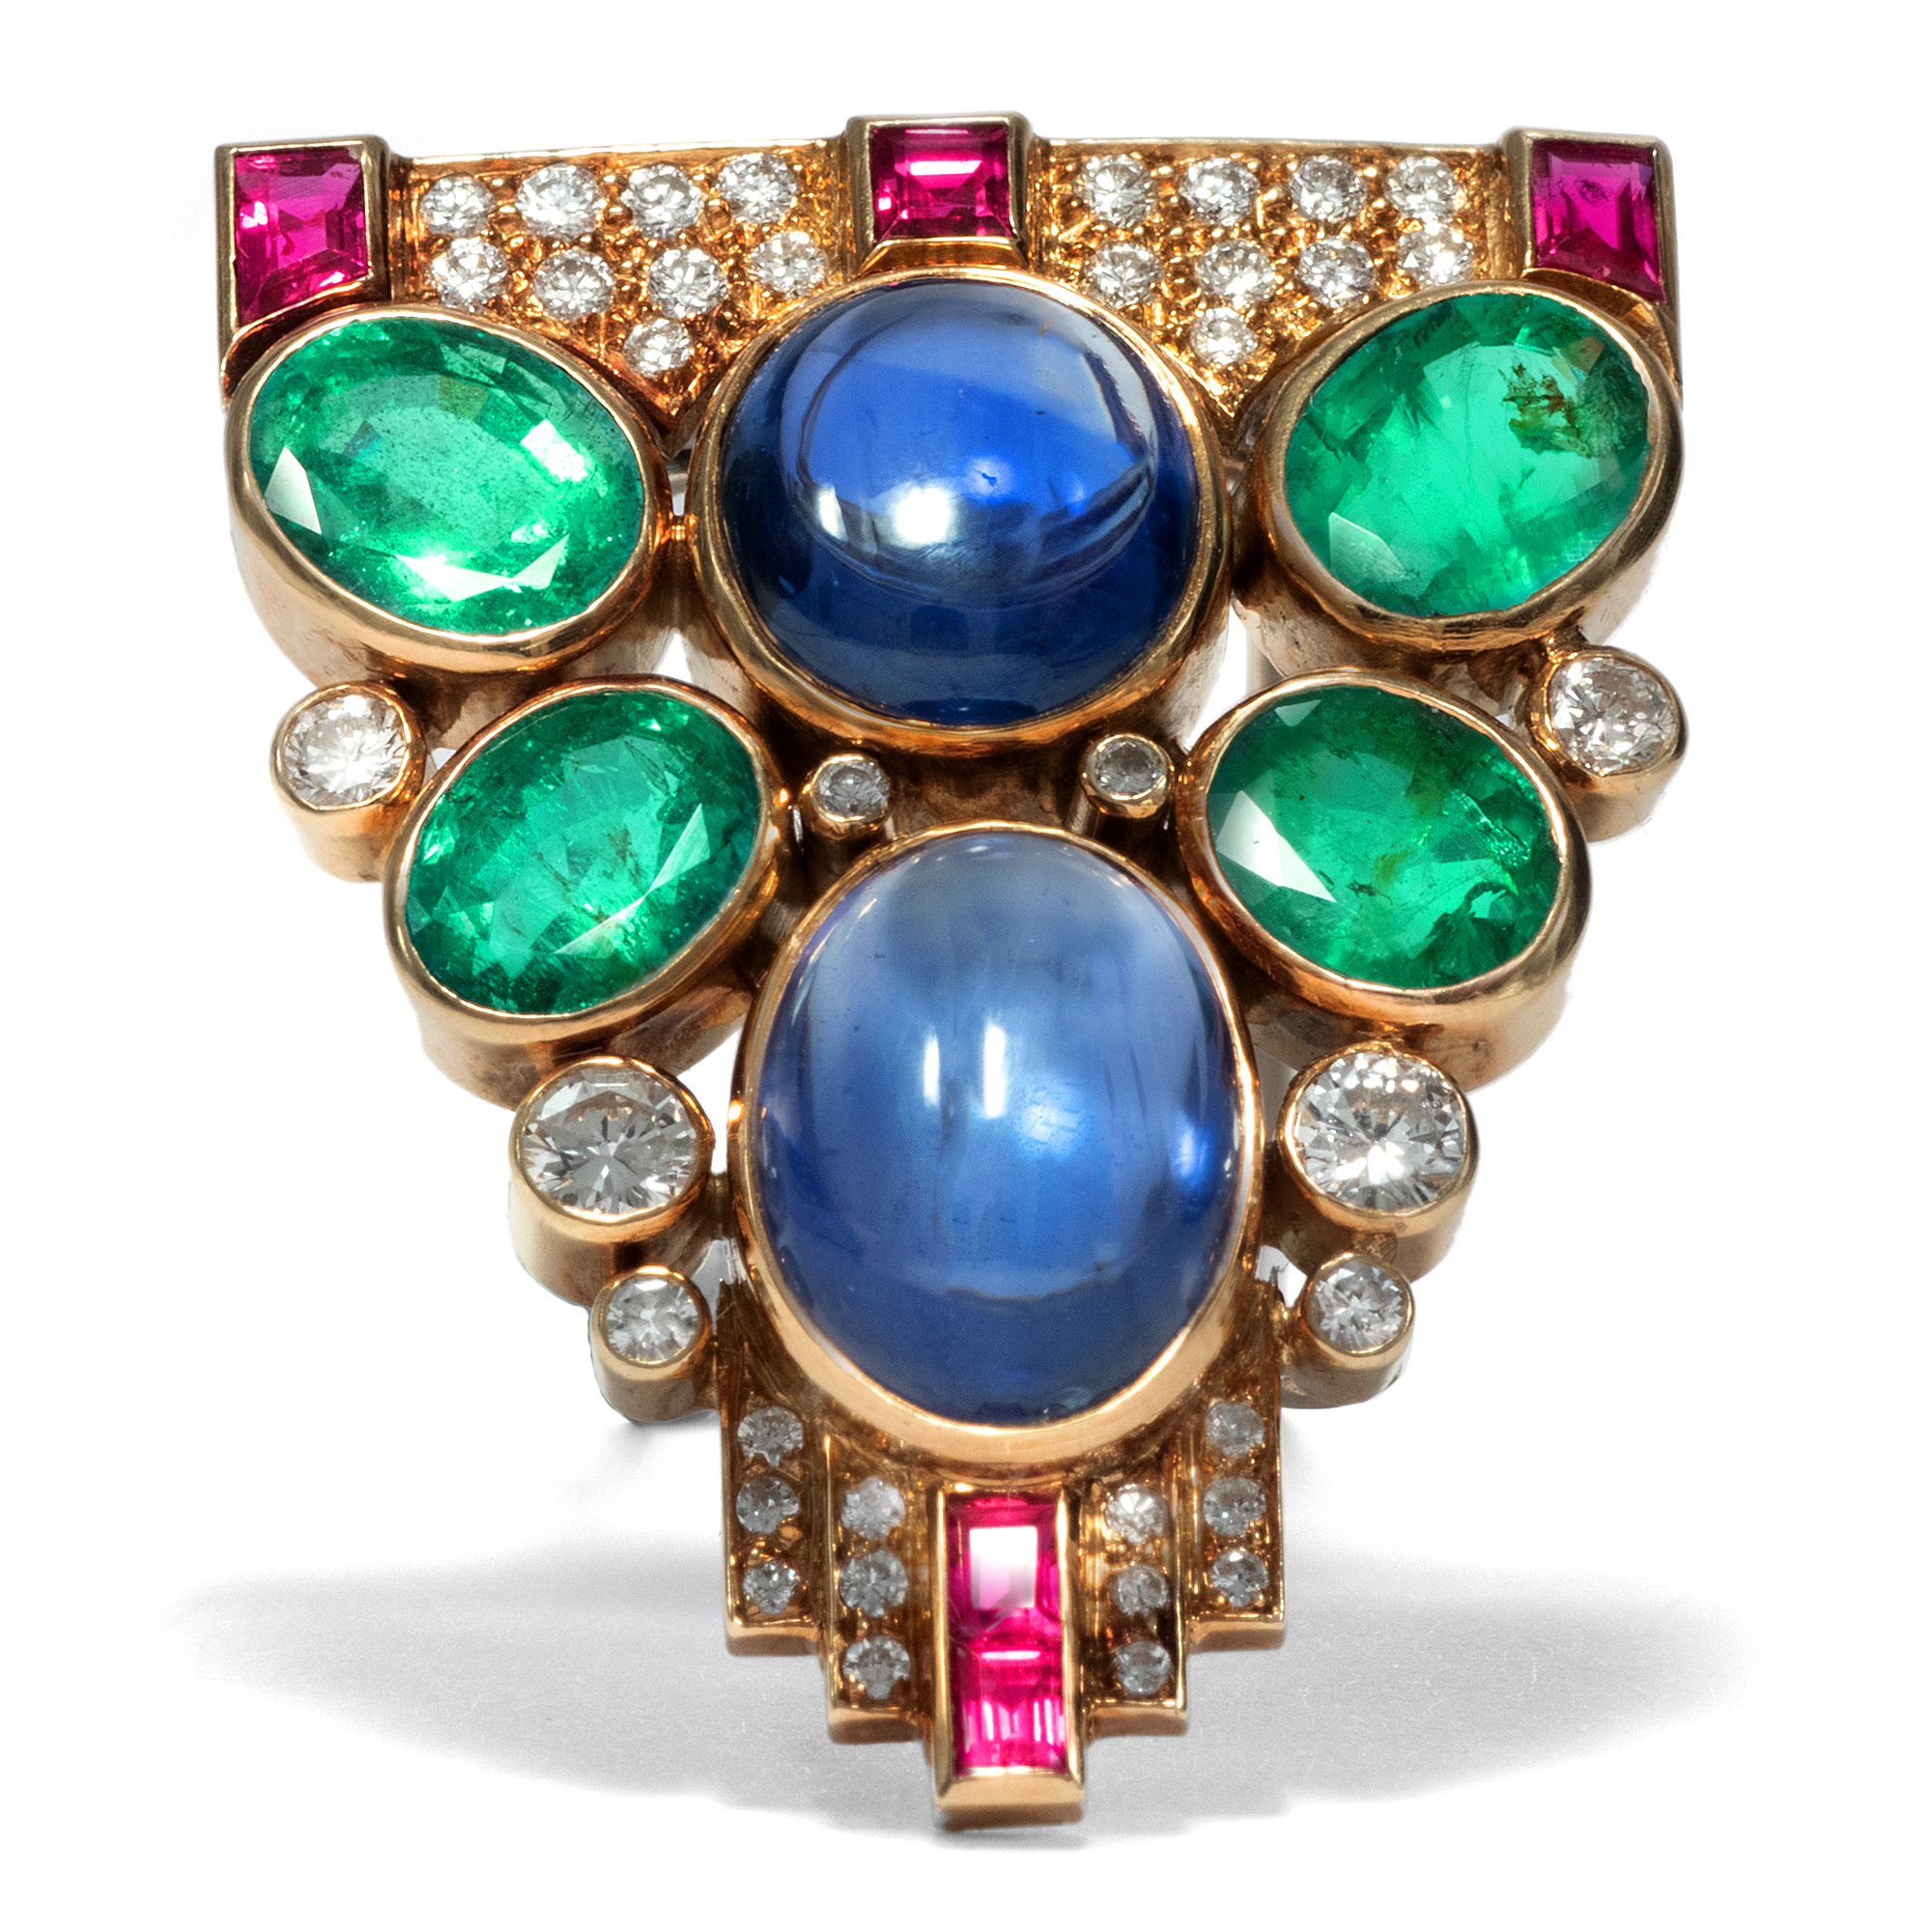 Splendid vintage clip brooch with rubies, sapphires and emeralds, around 1990